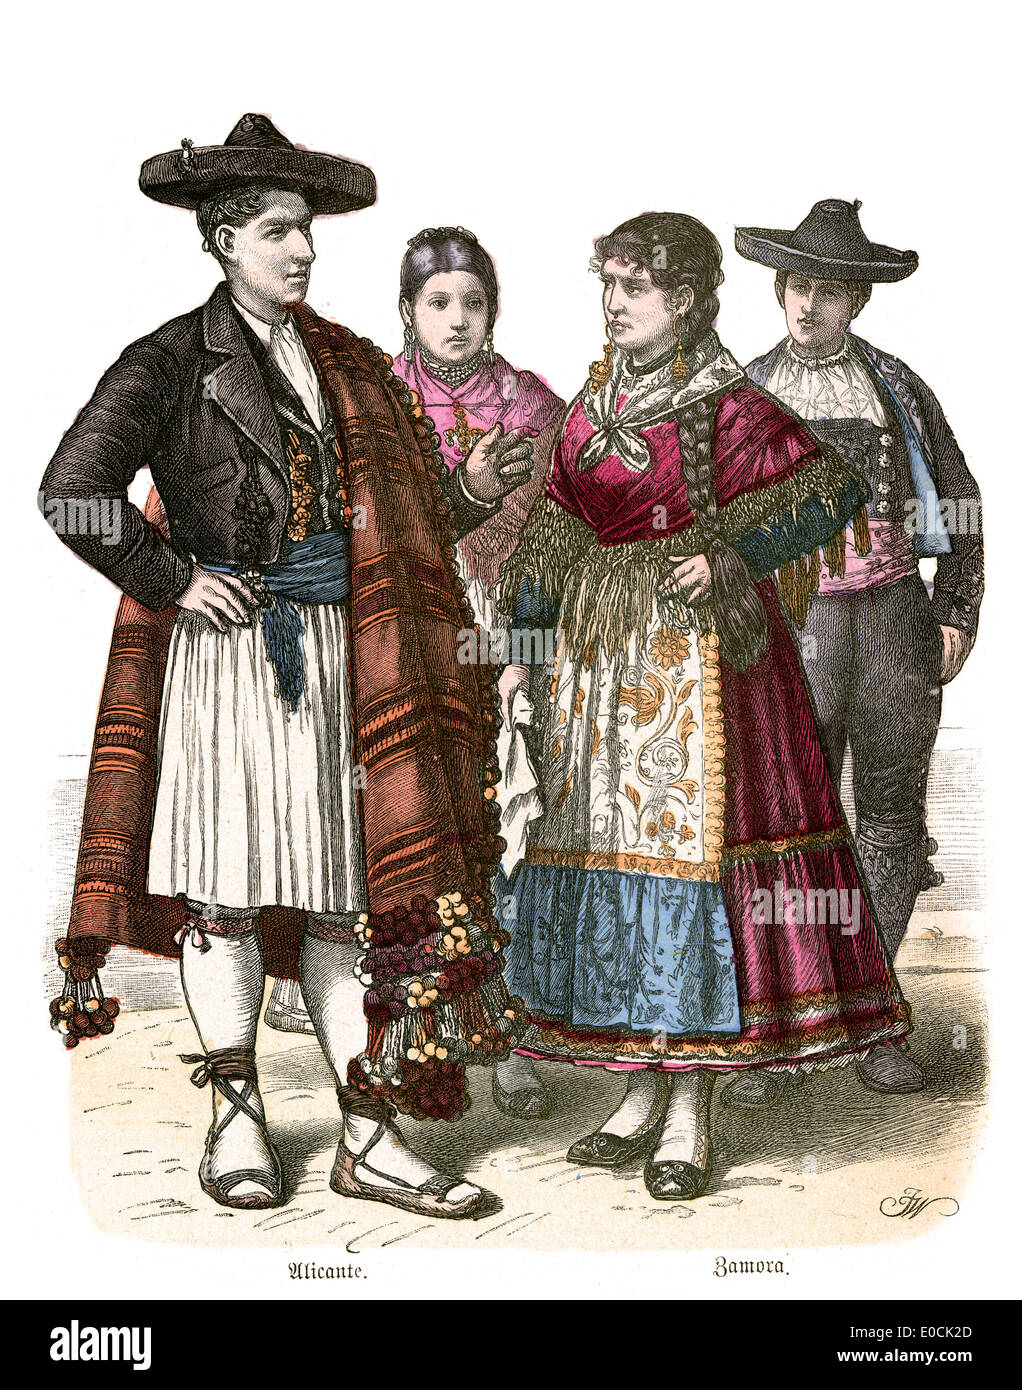 Traditional costumes of Spain and man from Allicante and Zamora, 19th Century Stock Photo